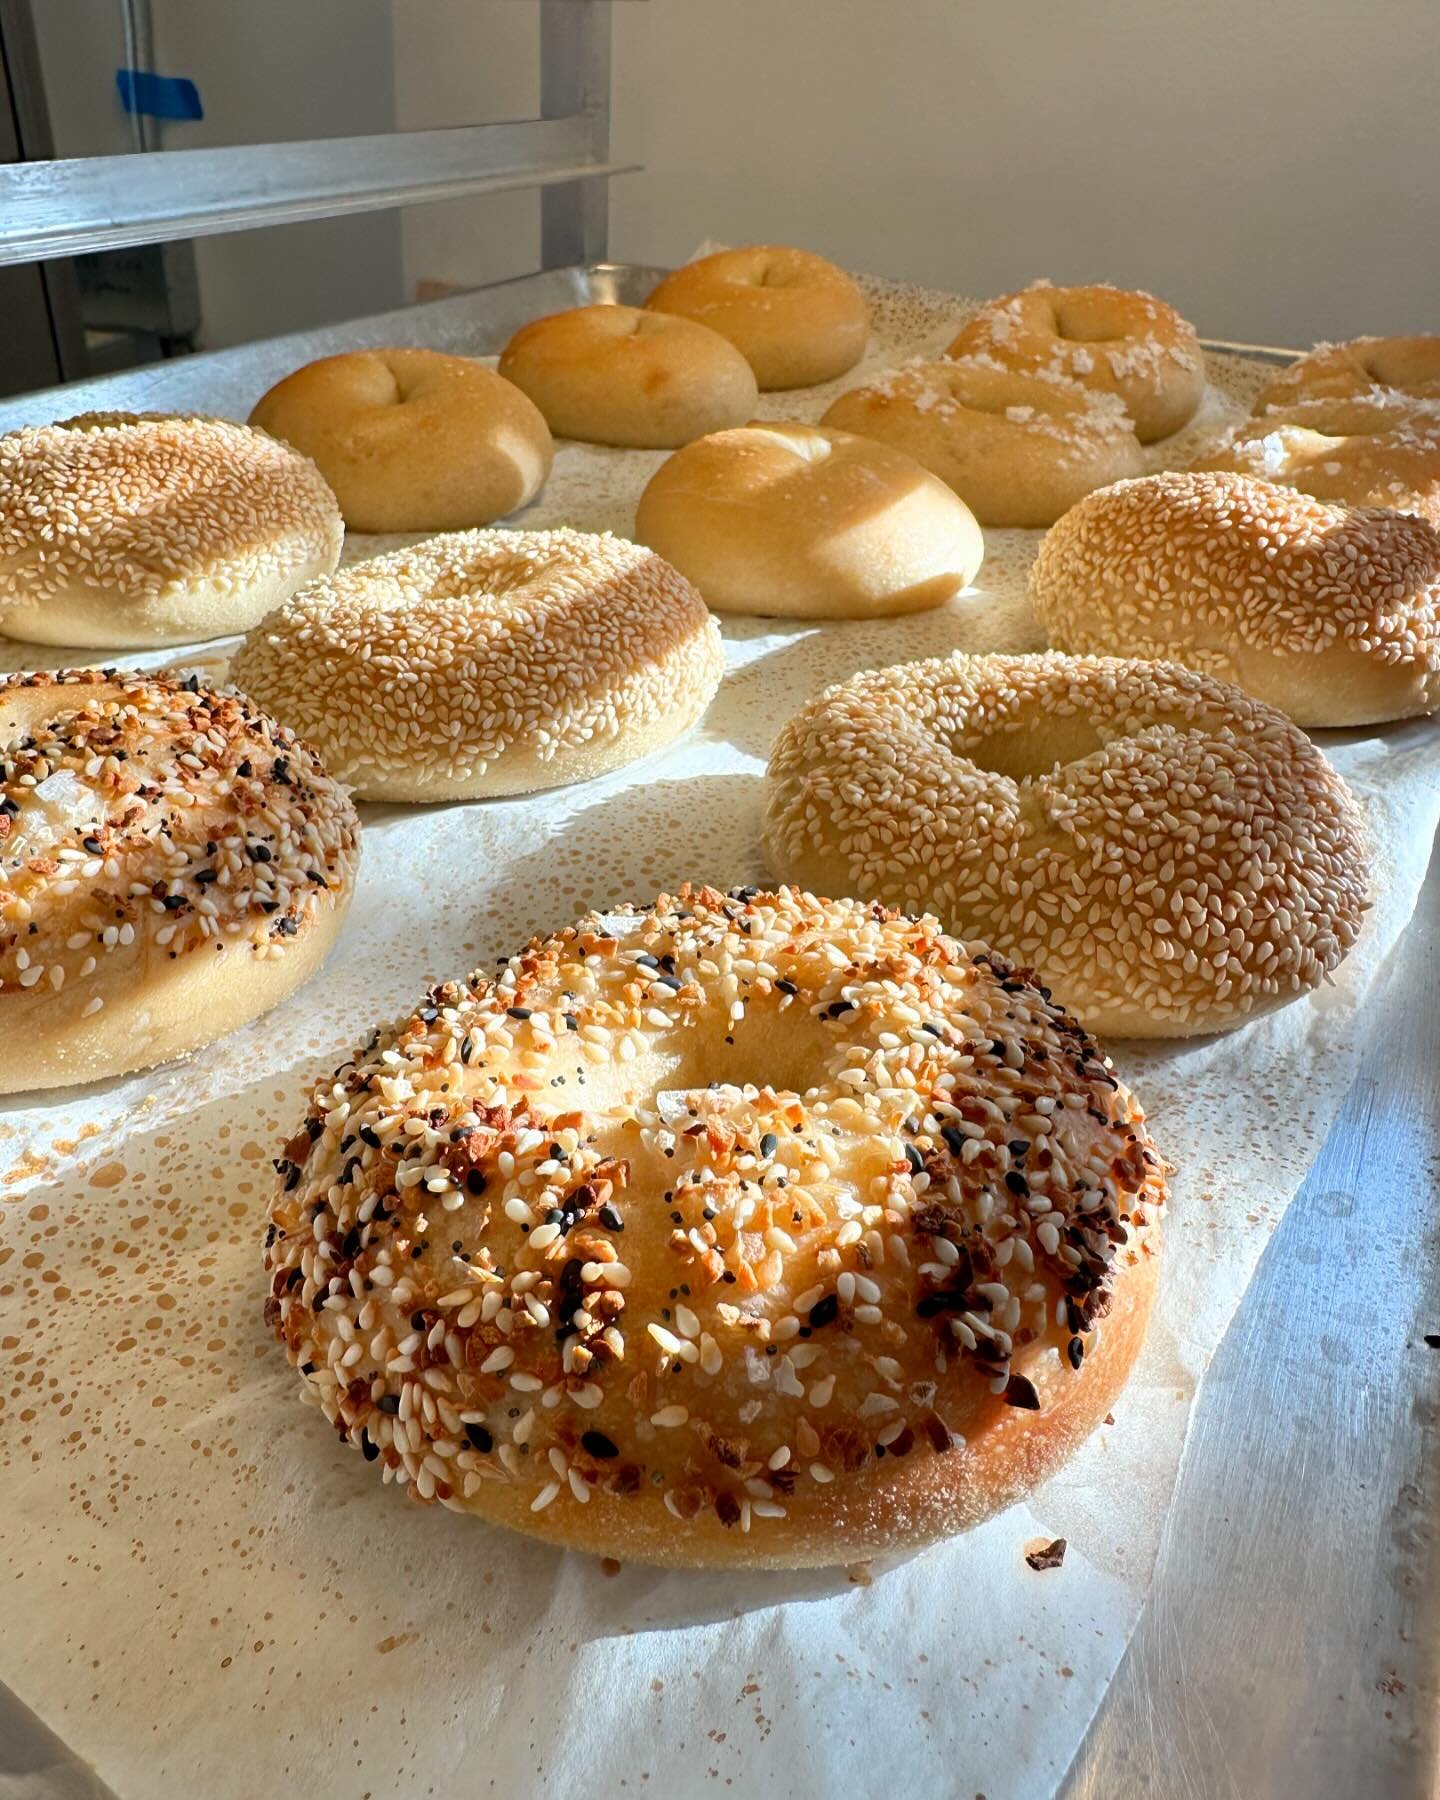 Pretty.  We do get the good sunshine in our kitchen on those sweet bagel babies.  Preorders are live at mermaidkitchenmadison.com